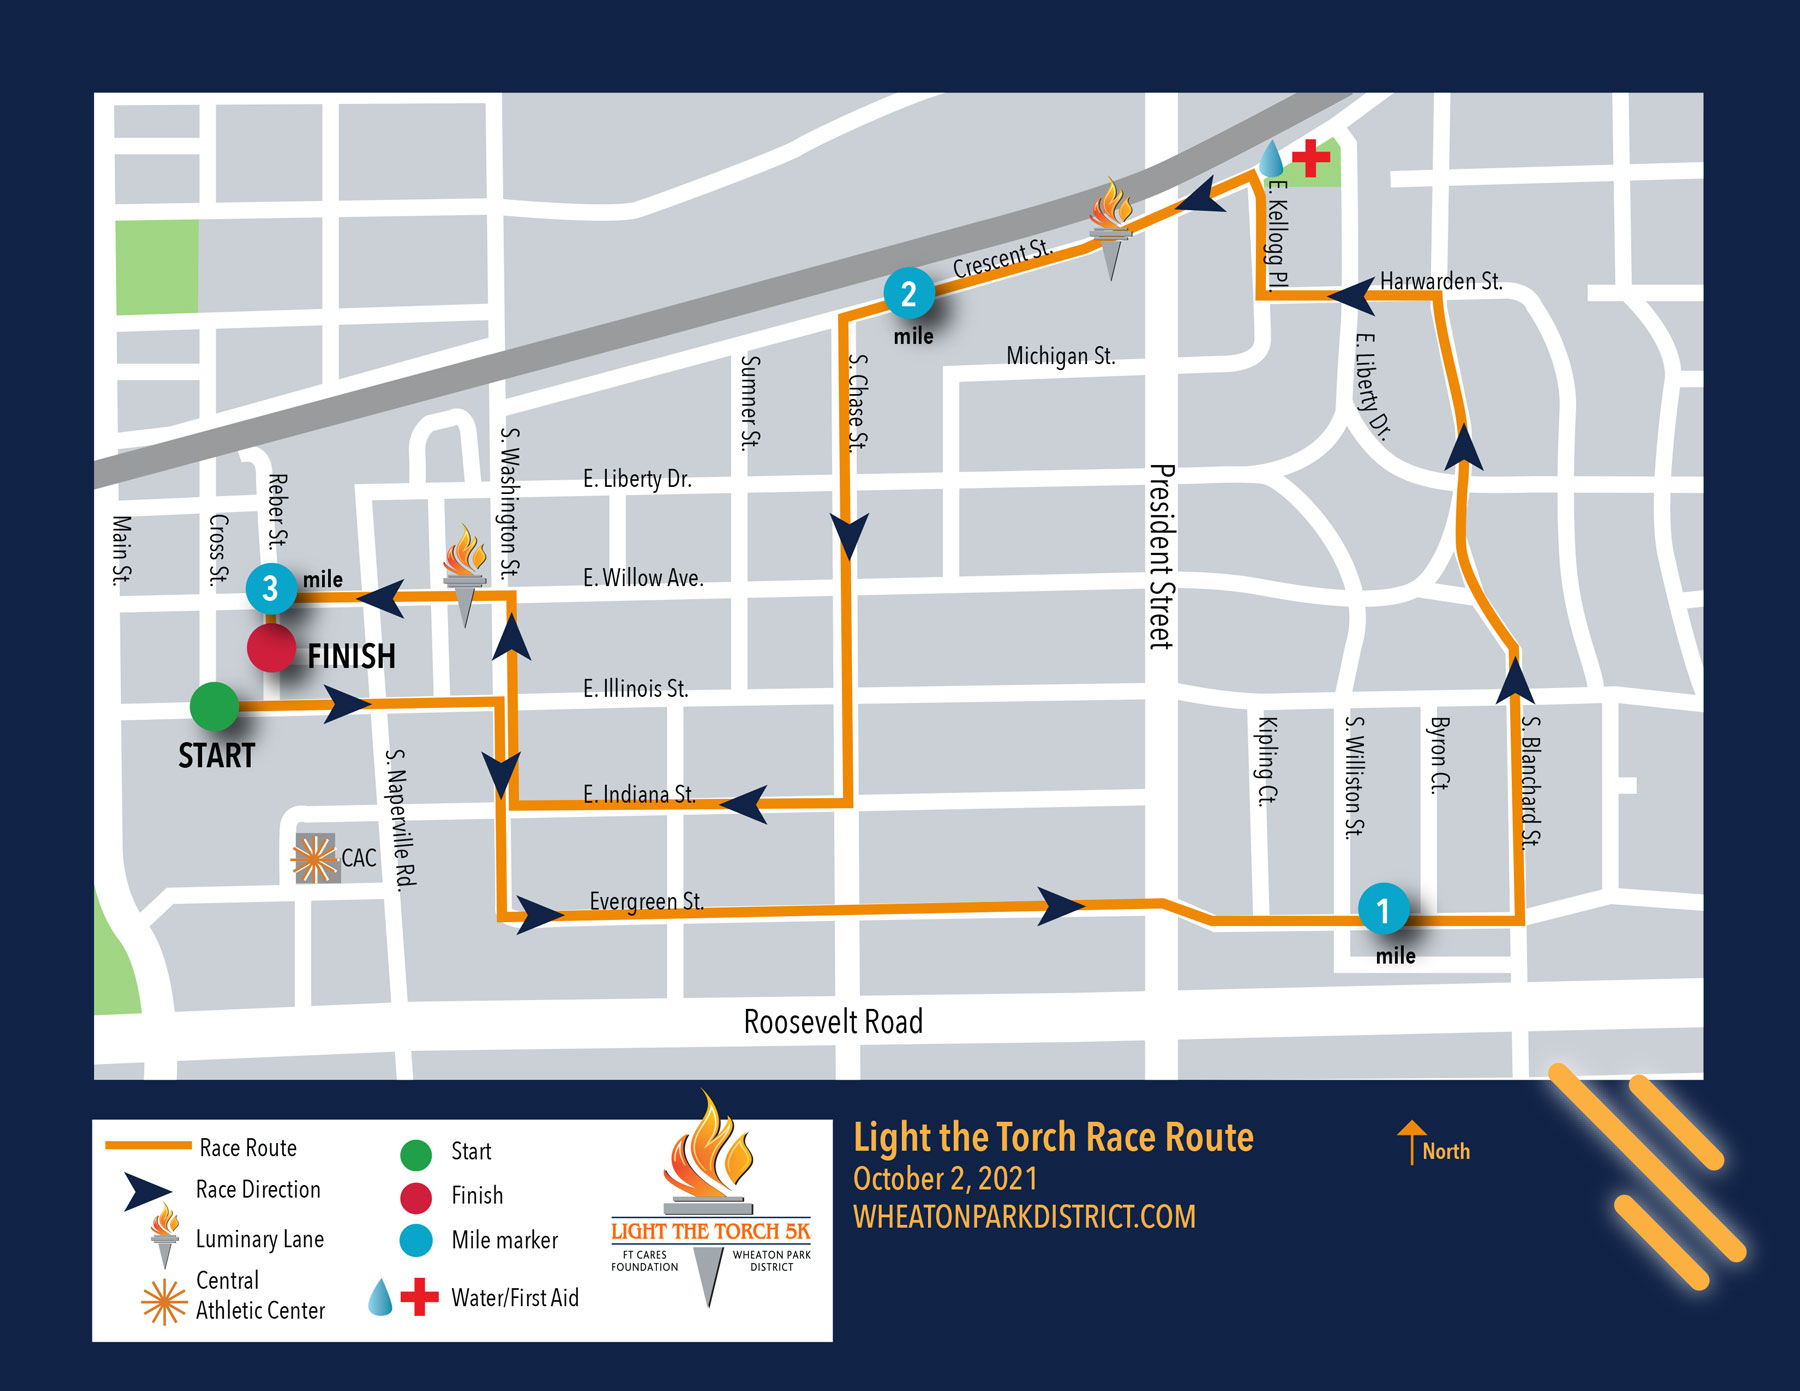 2021 Light the Torch Race Route image